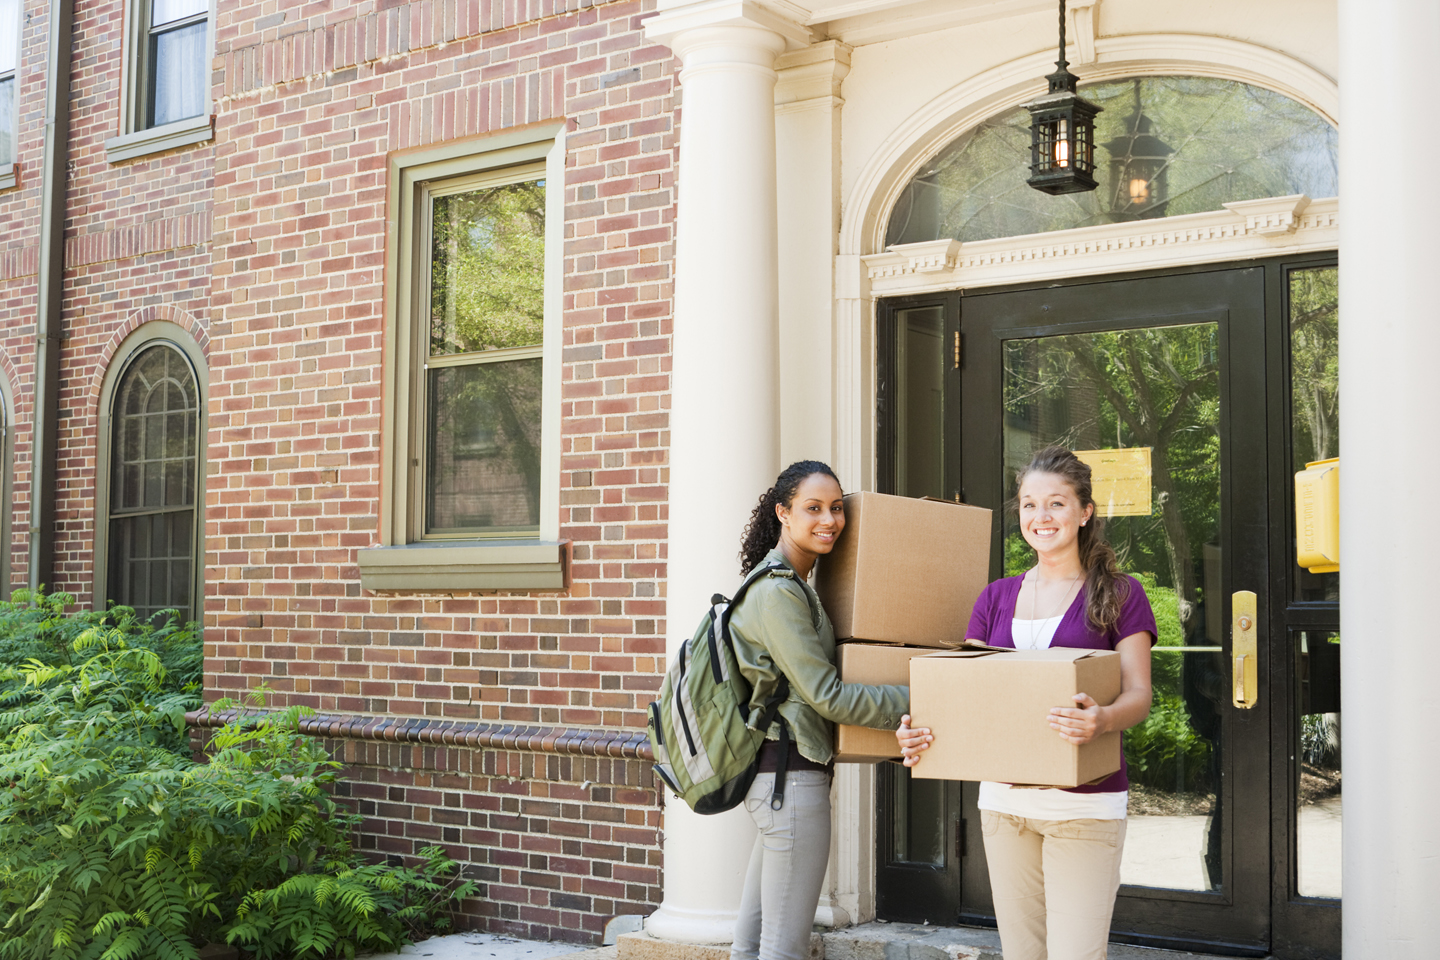 Back to School: Will Homeowners Insurance Protect Your Things